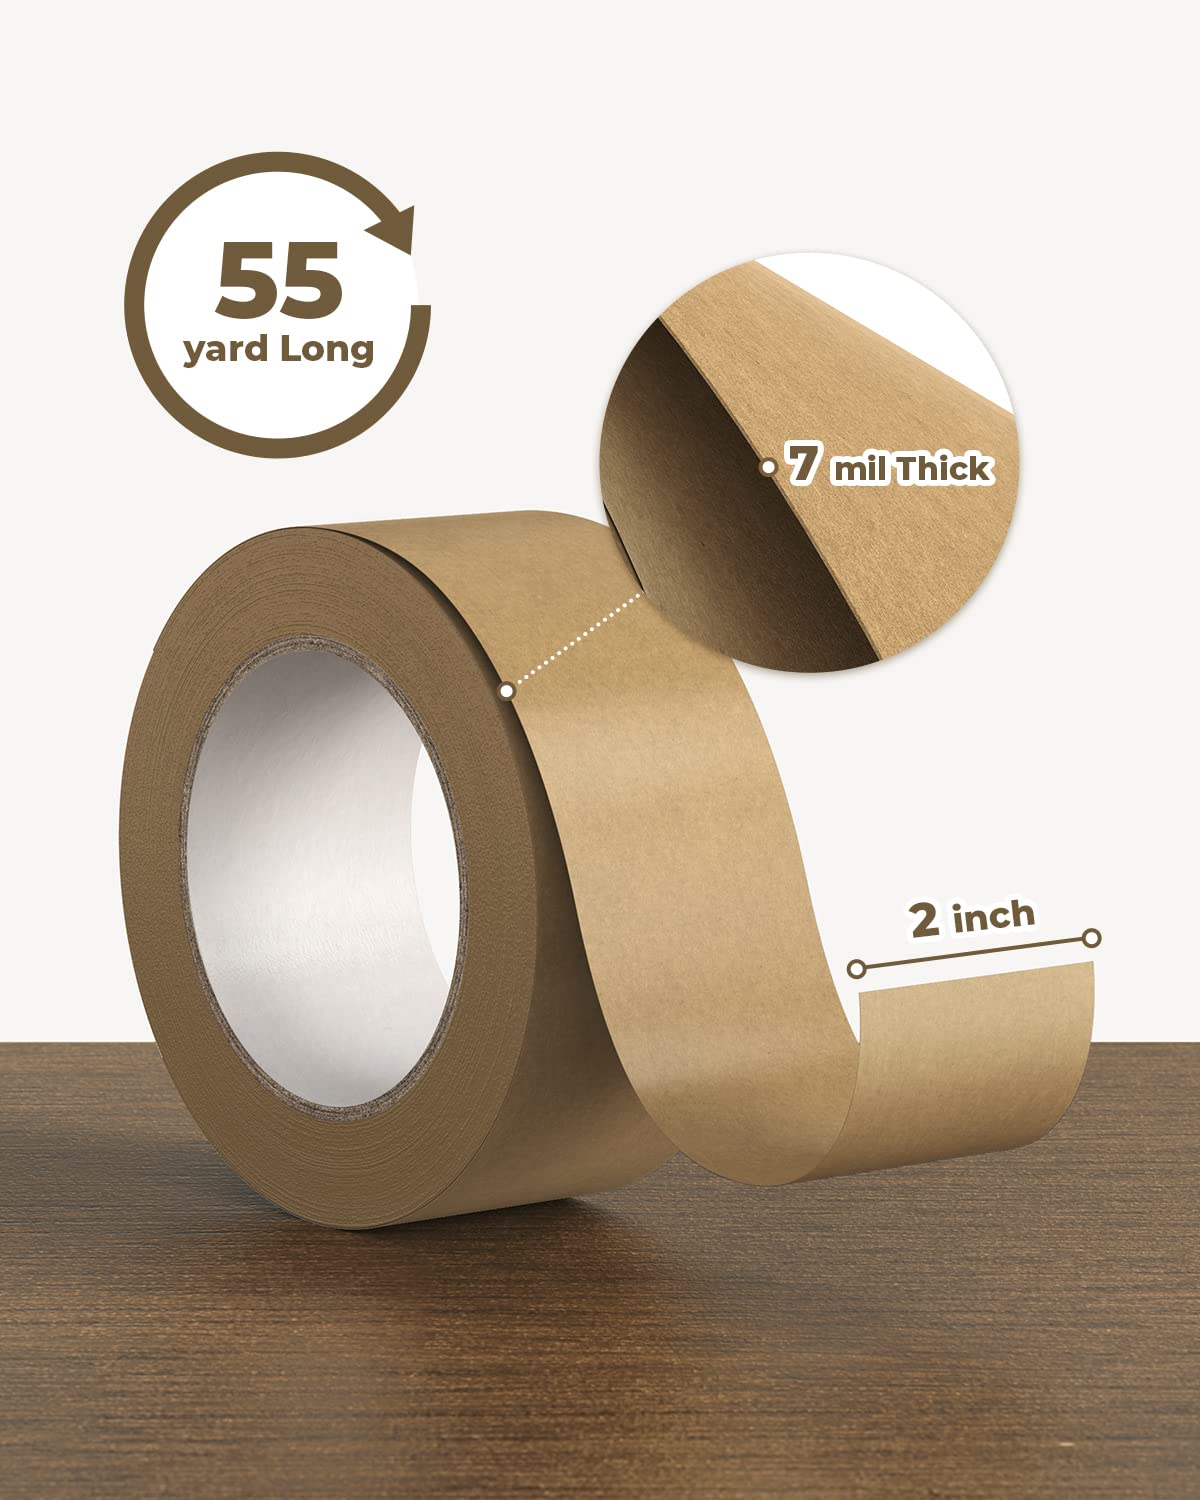 MUNBYN writable kraft tape is 7 mil thick and 2 inches wide.